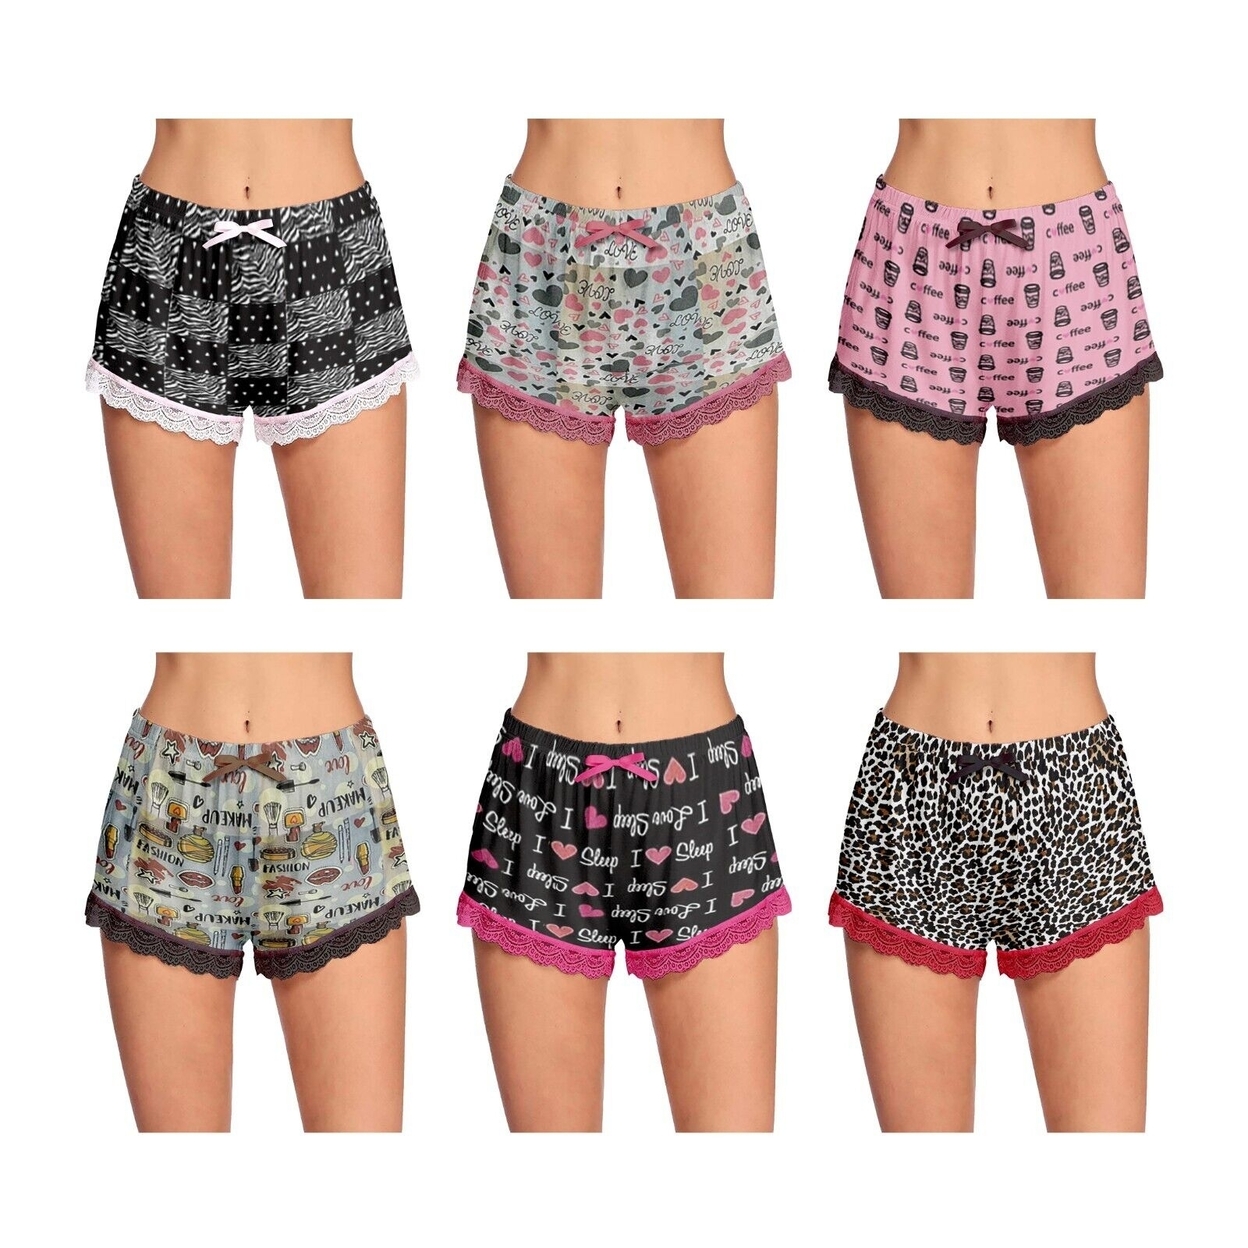 5-Pack: Women's Ultra-Soft Cozy Fun Printed Lace Trim Pajama Lounge Shorts - X-large, Shapes